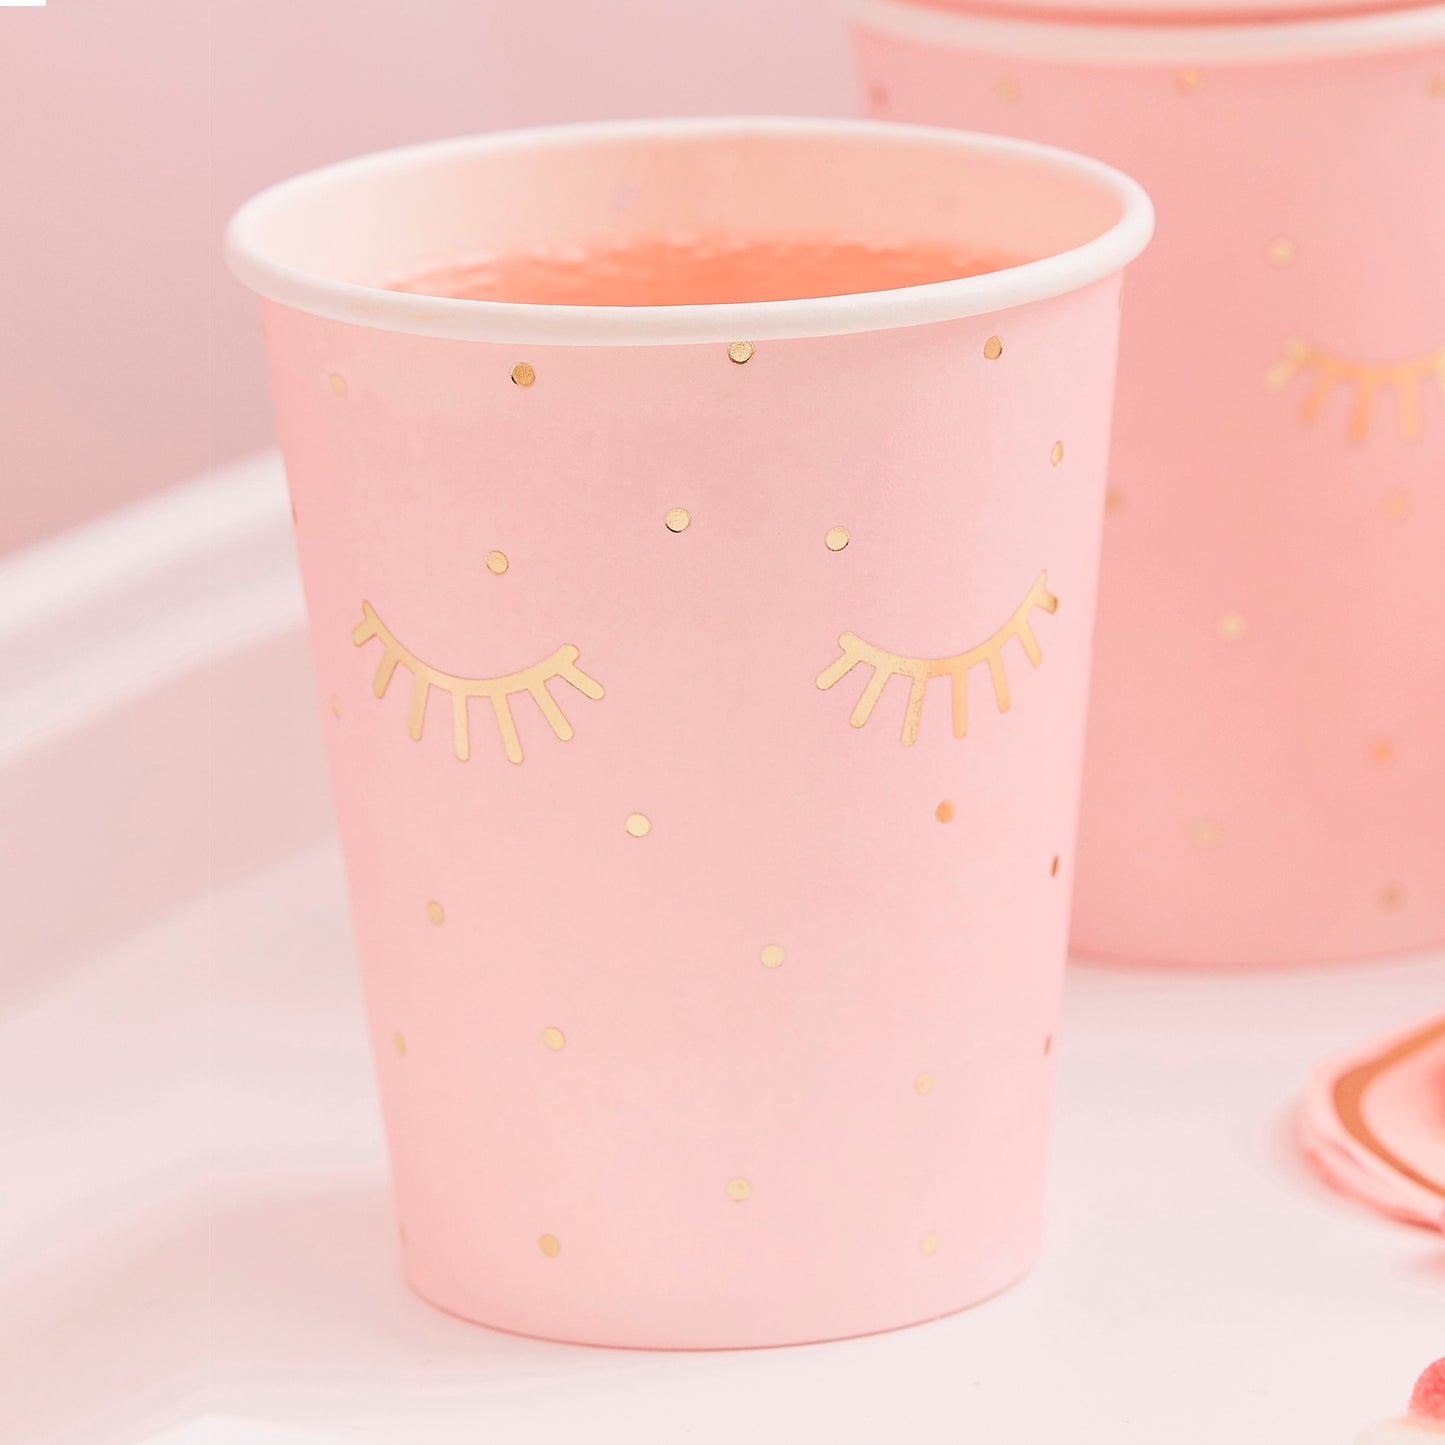 Pink Pamper Party Paper Cups - Muddy Boots Home UK